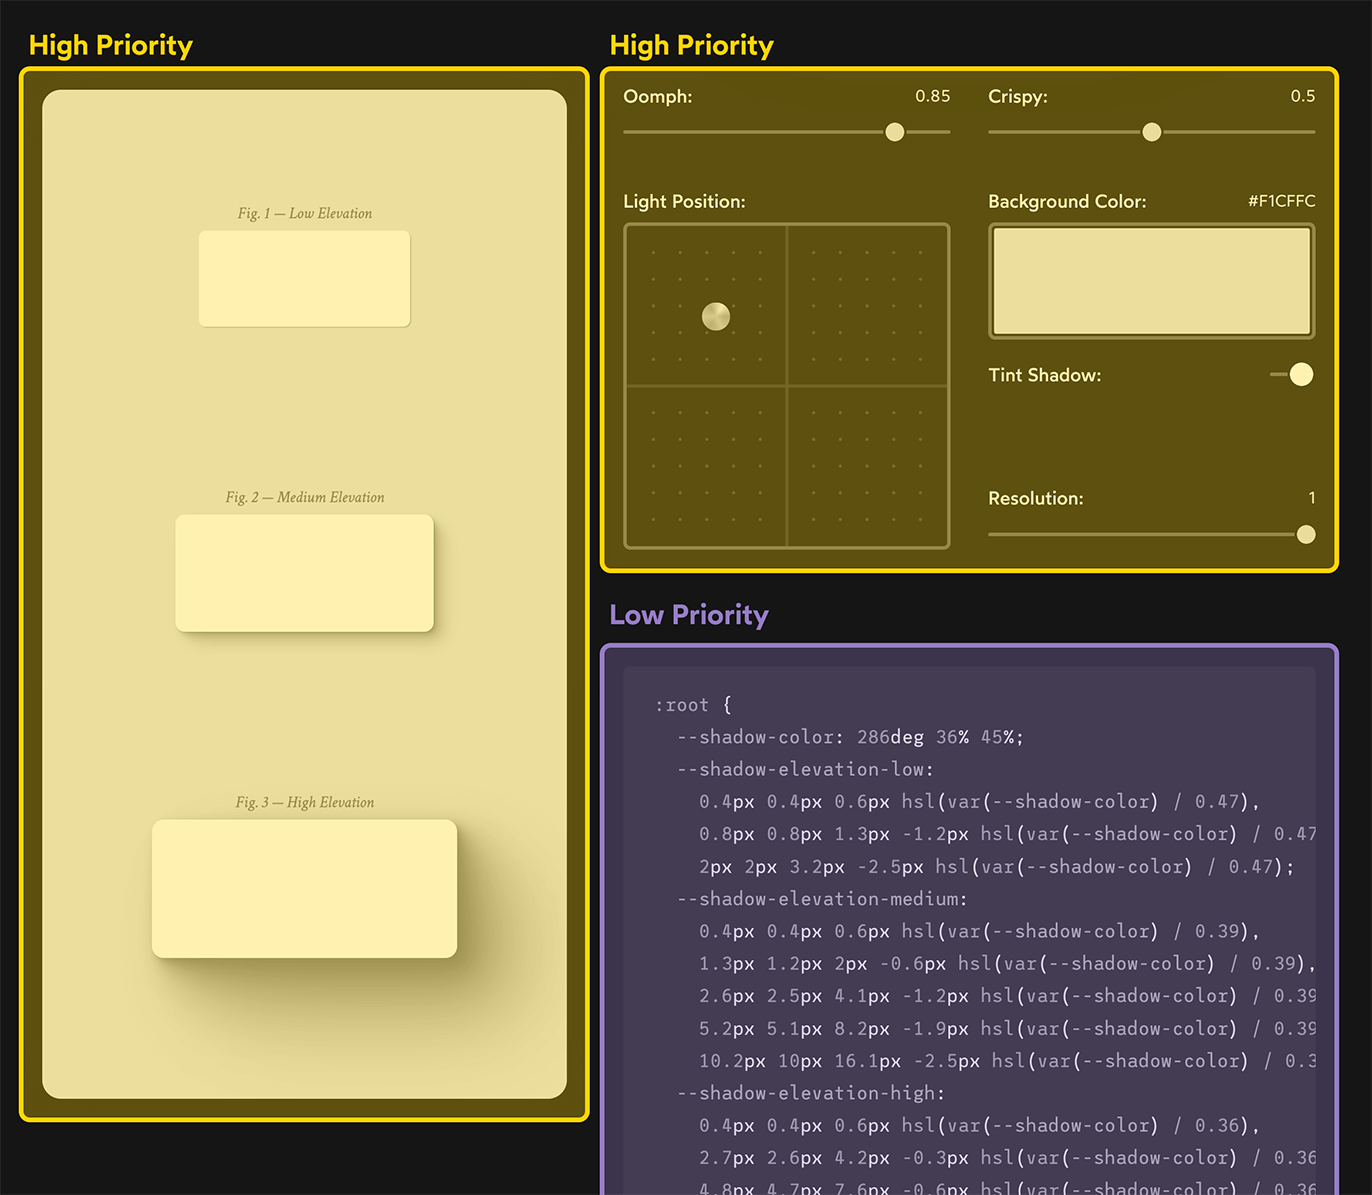 The same “Shadow Palette Generator” UI but with boxes drawn on top. The shadow output on the left and the controls are labeled “high priority”, while the code output in the bottom right is labeled “low priority”.